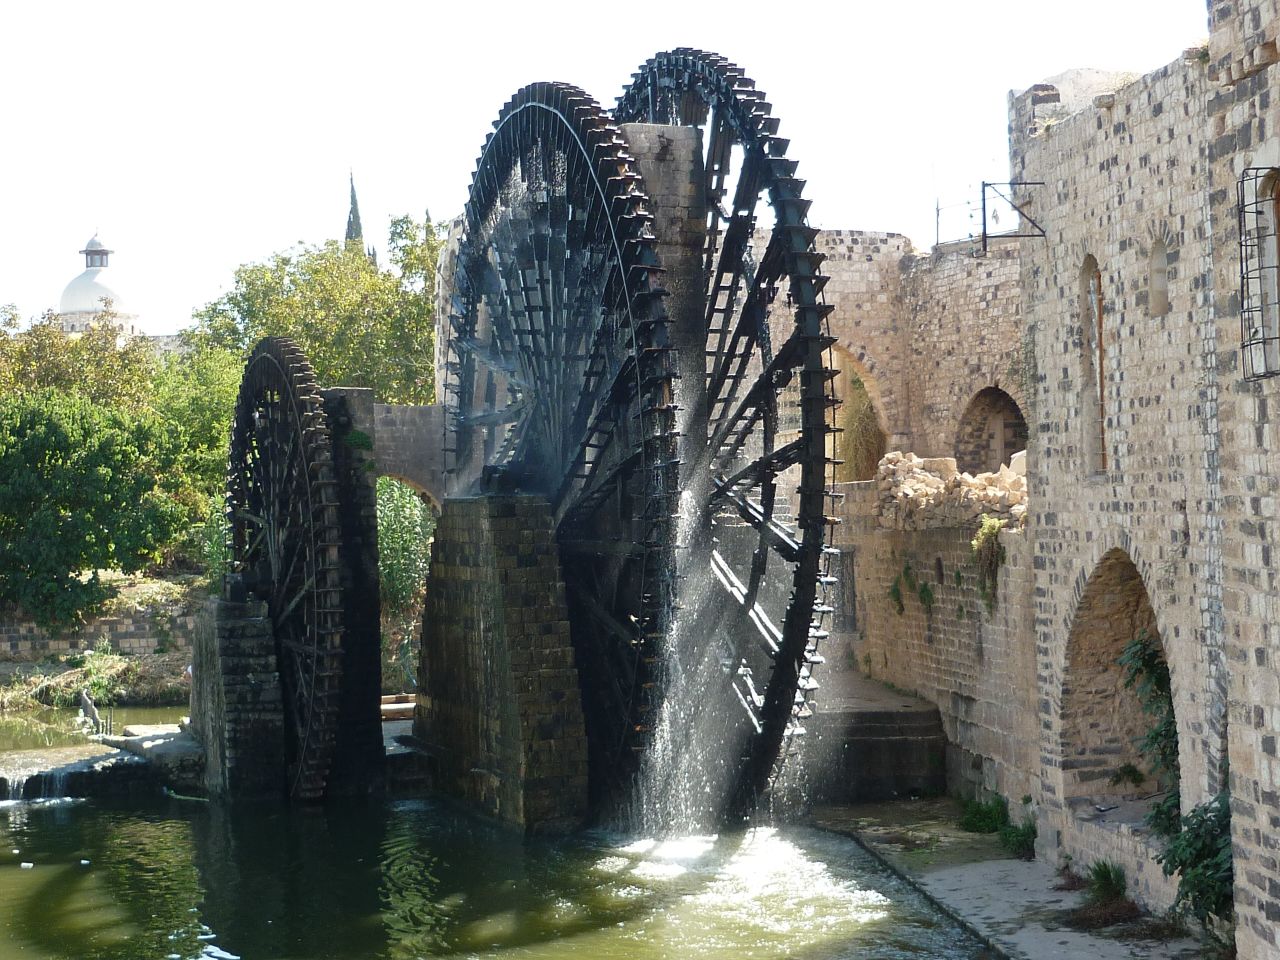 These 20-meter wide water wheels were first documented in the 5th century, representing an ingenious early irrigation system. Seventeen of the wooden norias (a machine for lifting water into an aqueduct) survived to present day and became Hama's primary tourist attraction, noted for their groaning sounds as they turned. Heritage experts <a href="http://www.dgam.gov.sy/index.php?p=314&id=1374" target="_blank" target="_blank">documented several wheels</a> being burned by fighters in 2014.